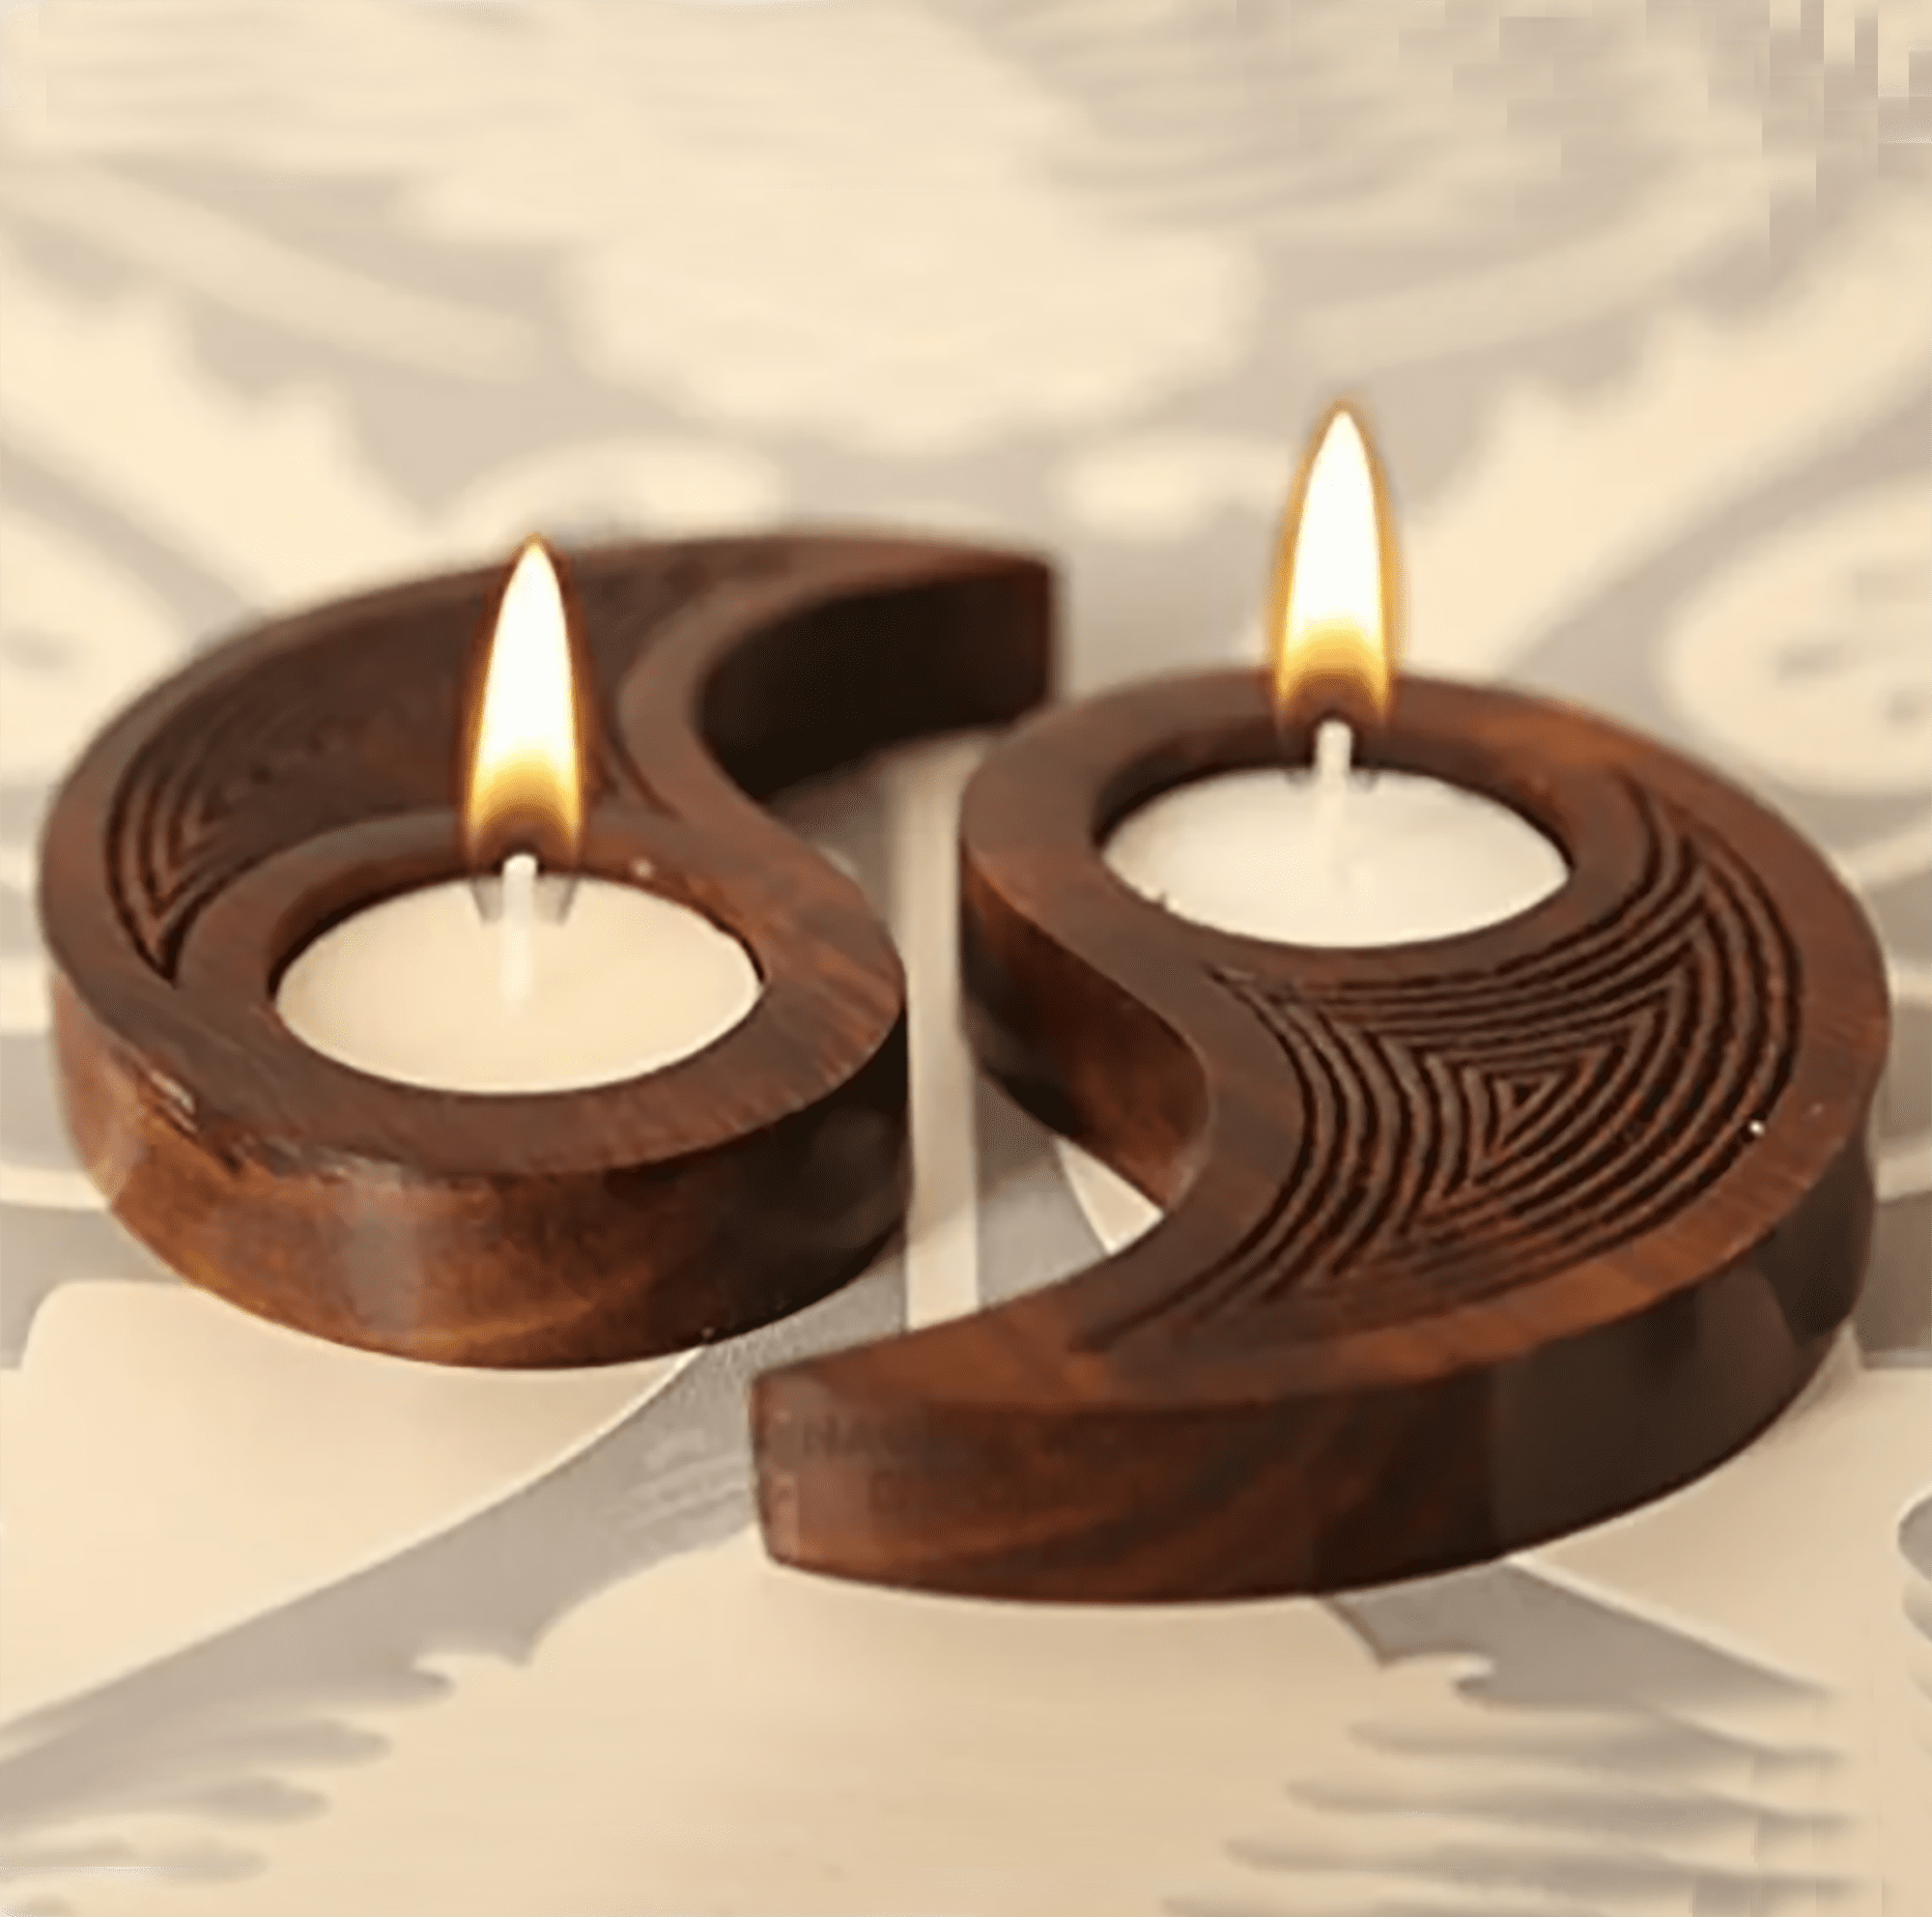 Wooden Tea Light Holder Hand Carved | Diwali and Christmas Gift Idea | Home and Gift | Includes Tea Light (Pack of 2)